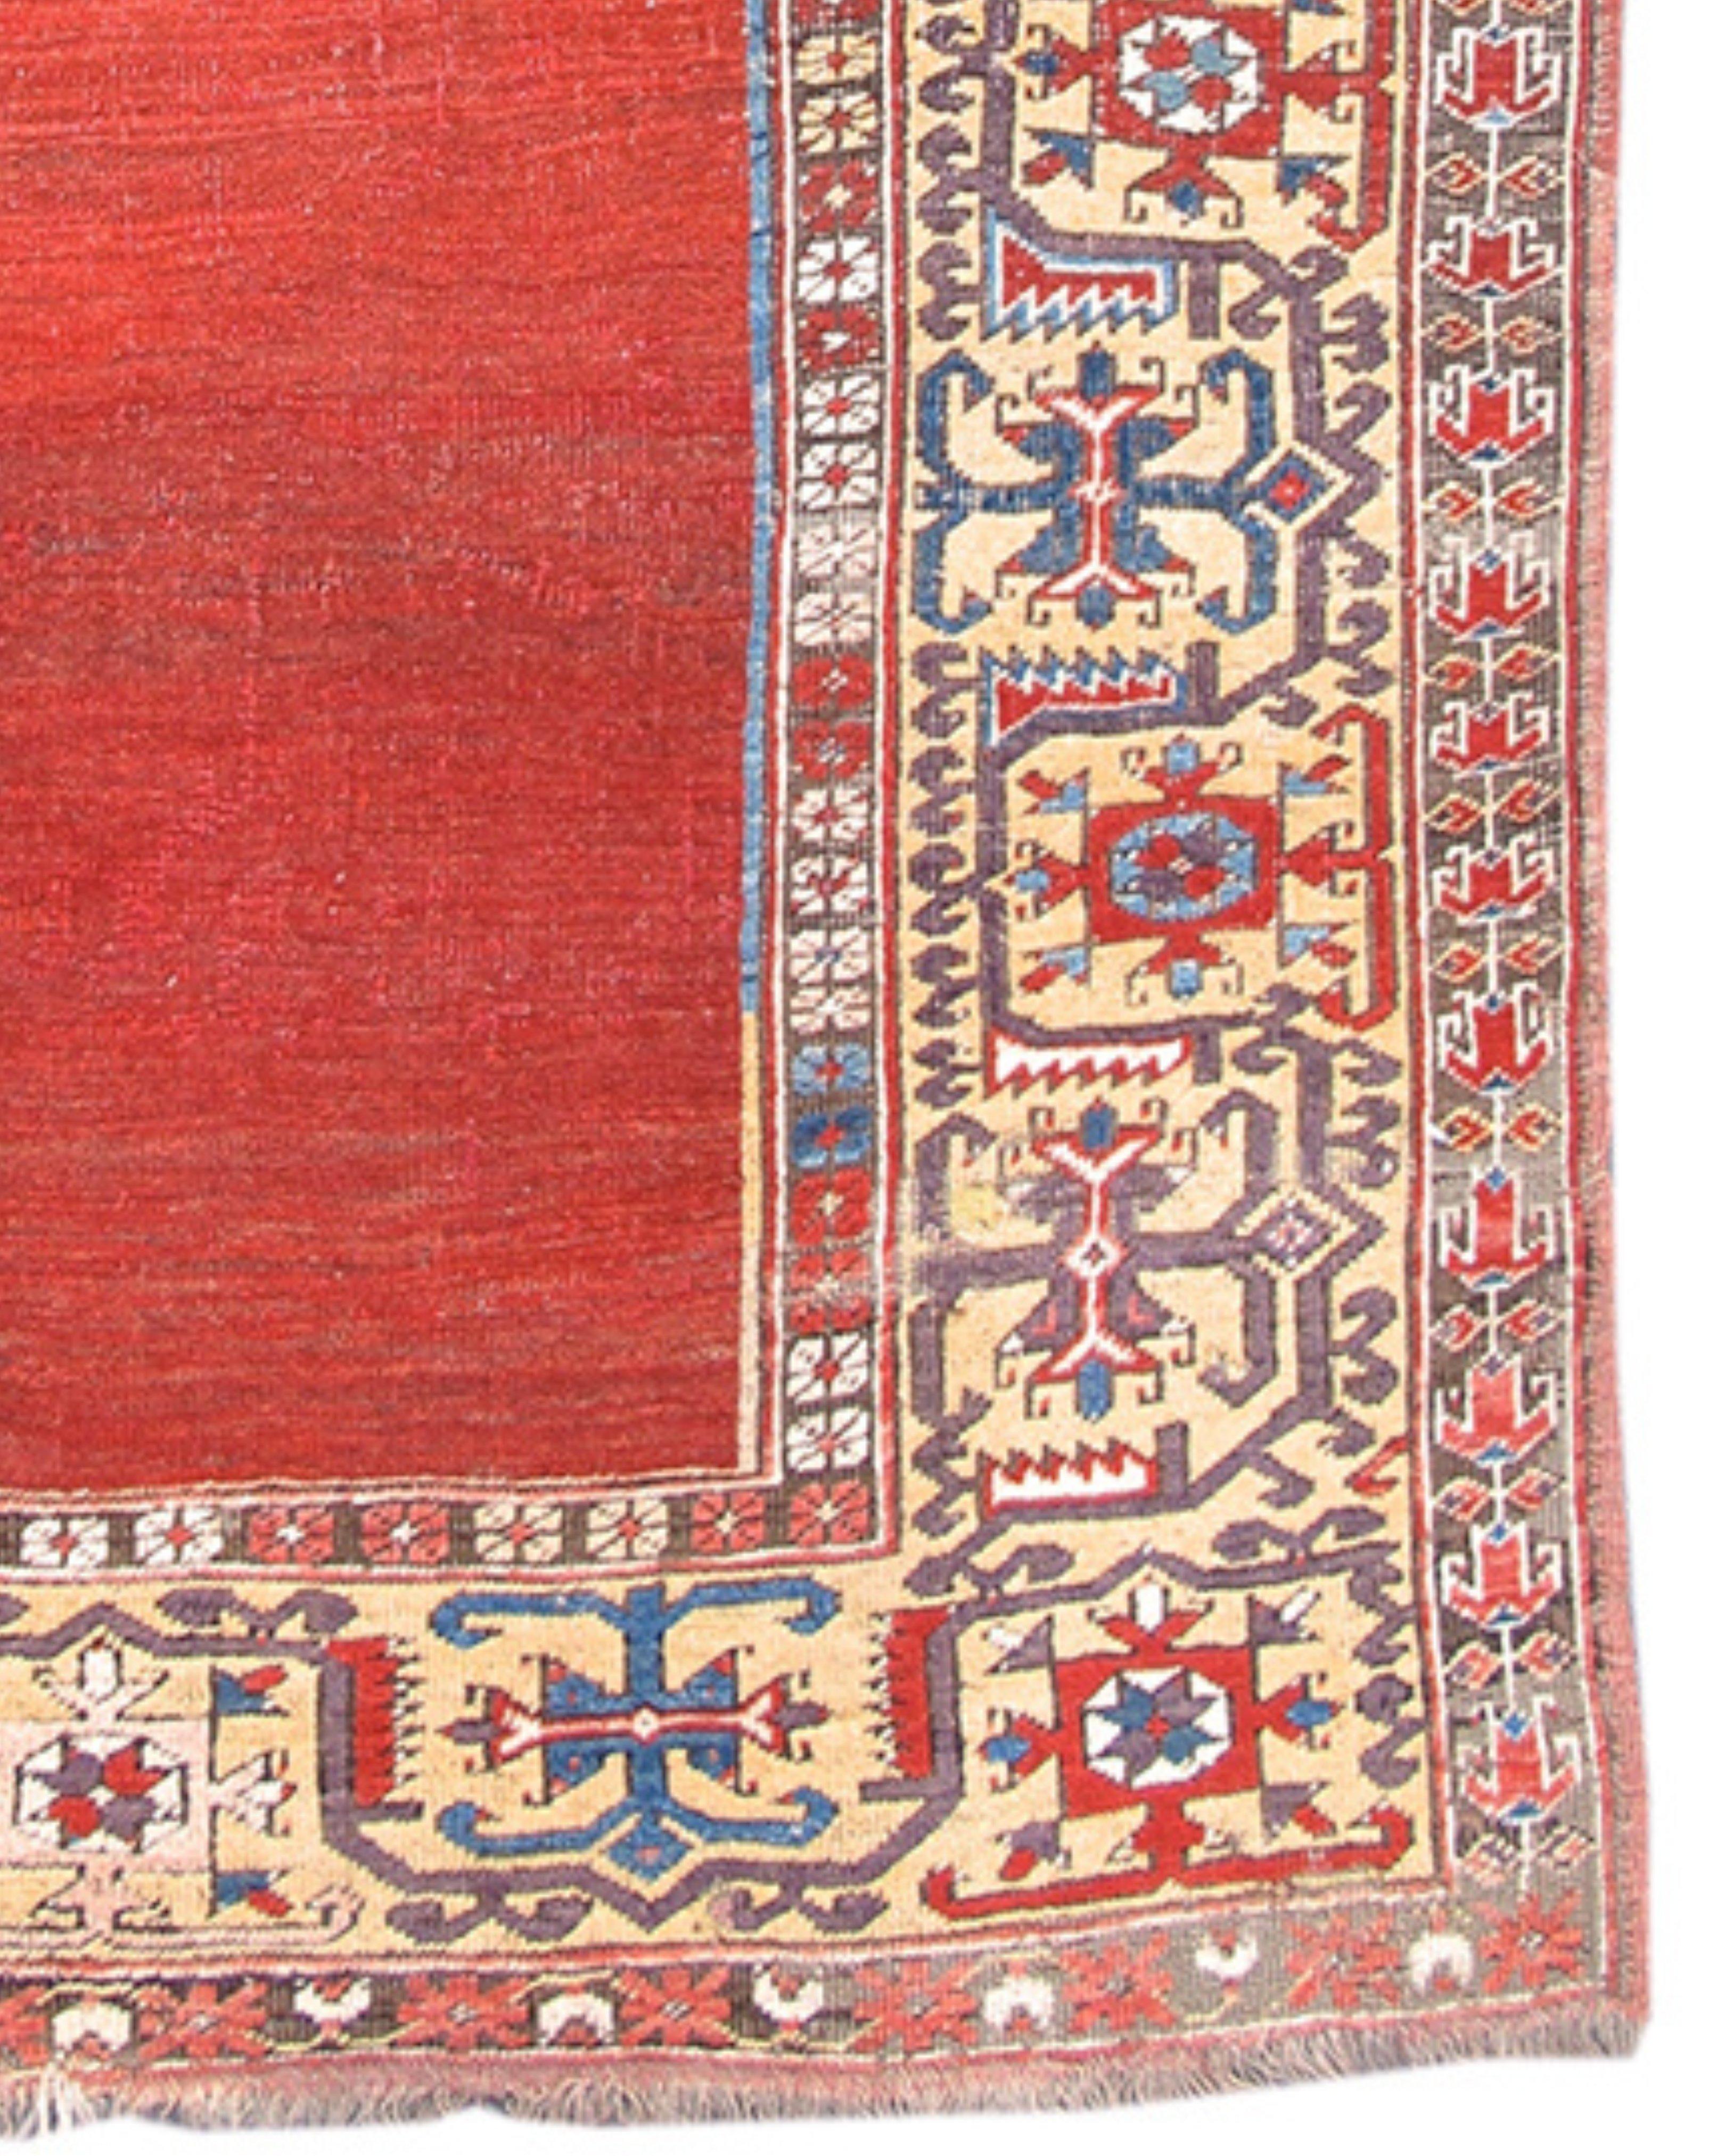 Ladik Prayer Rug, circa 1800

Ladik prayer rugs from Central Anatolia are known for their distinctive depressed warp weave and repertoire of design combined with prized Anatolian saturated color. A classic crenelated mihrab niche is drawn with a